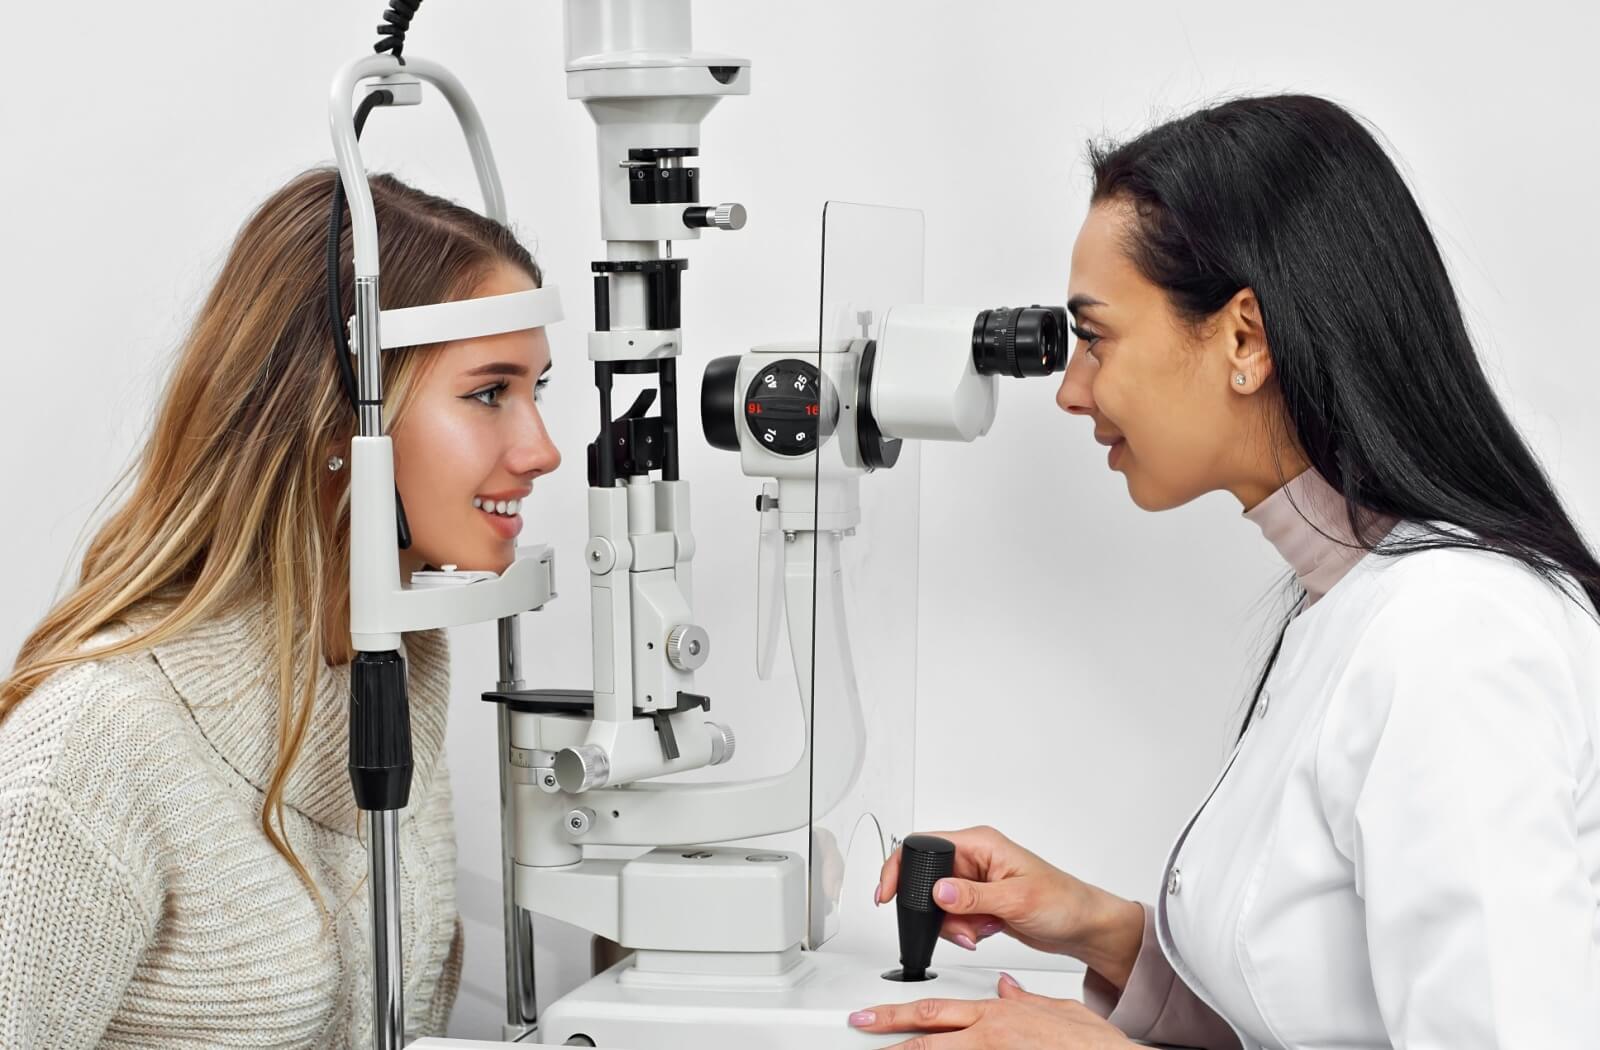 A young person with long blonde hair is receiving an eye exam from an optometrist, who is using a specialized machine to examine their eyes.